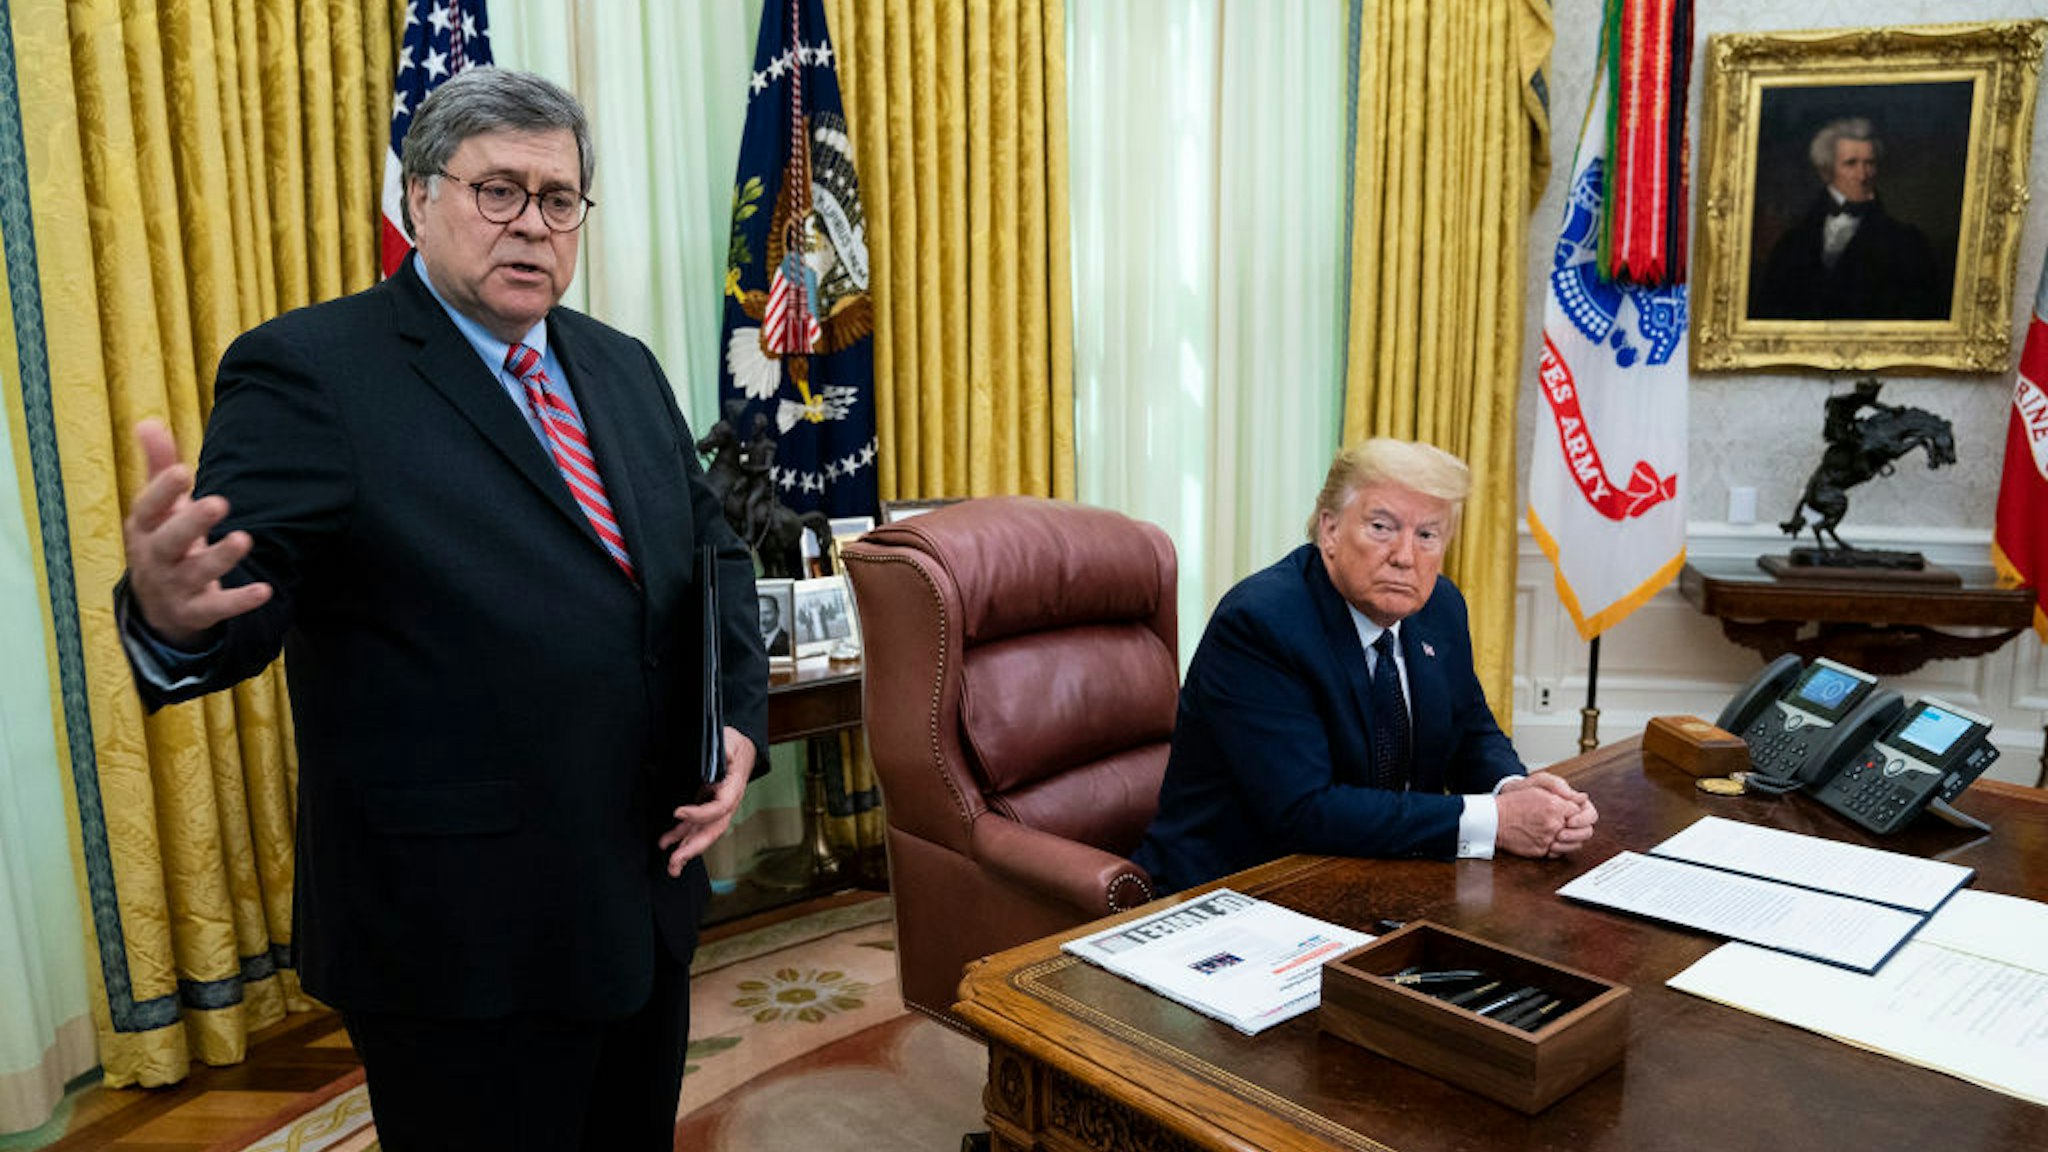 NYTVIRUS -President Donald Trump with Attorney General William Barr, make remarks before signsing an executive order in the Oval Office that will punish Facebook, Google and Twitter for the way they police content online, Thursday, May 28, 2020. ( Photo by Doug Mills/The New York Times)